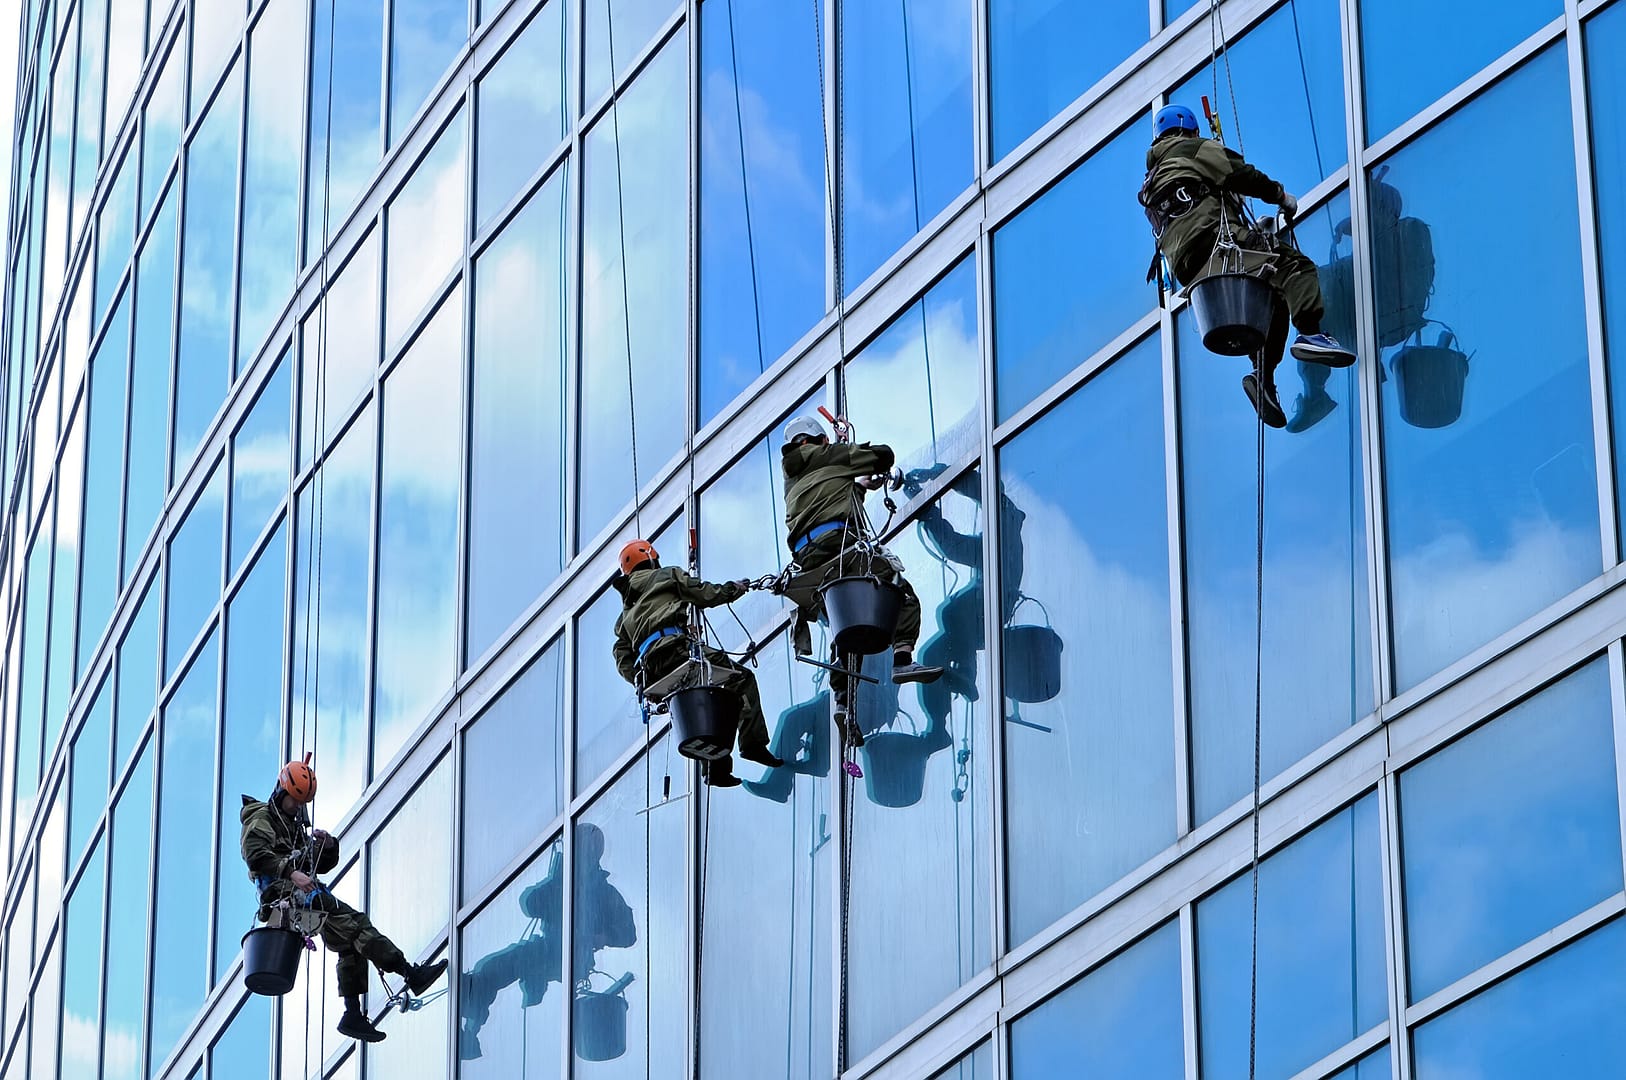 Industrial climbers suspended on ropes washing the windows of a towering skyscraper, high above the city streets.